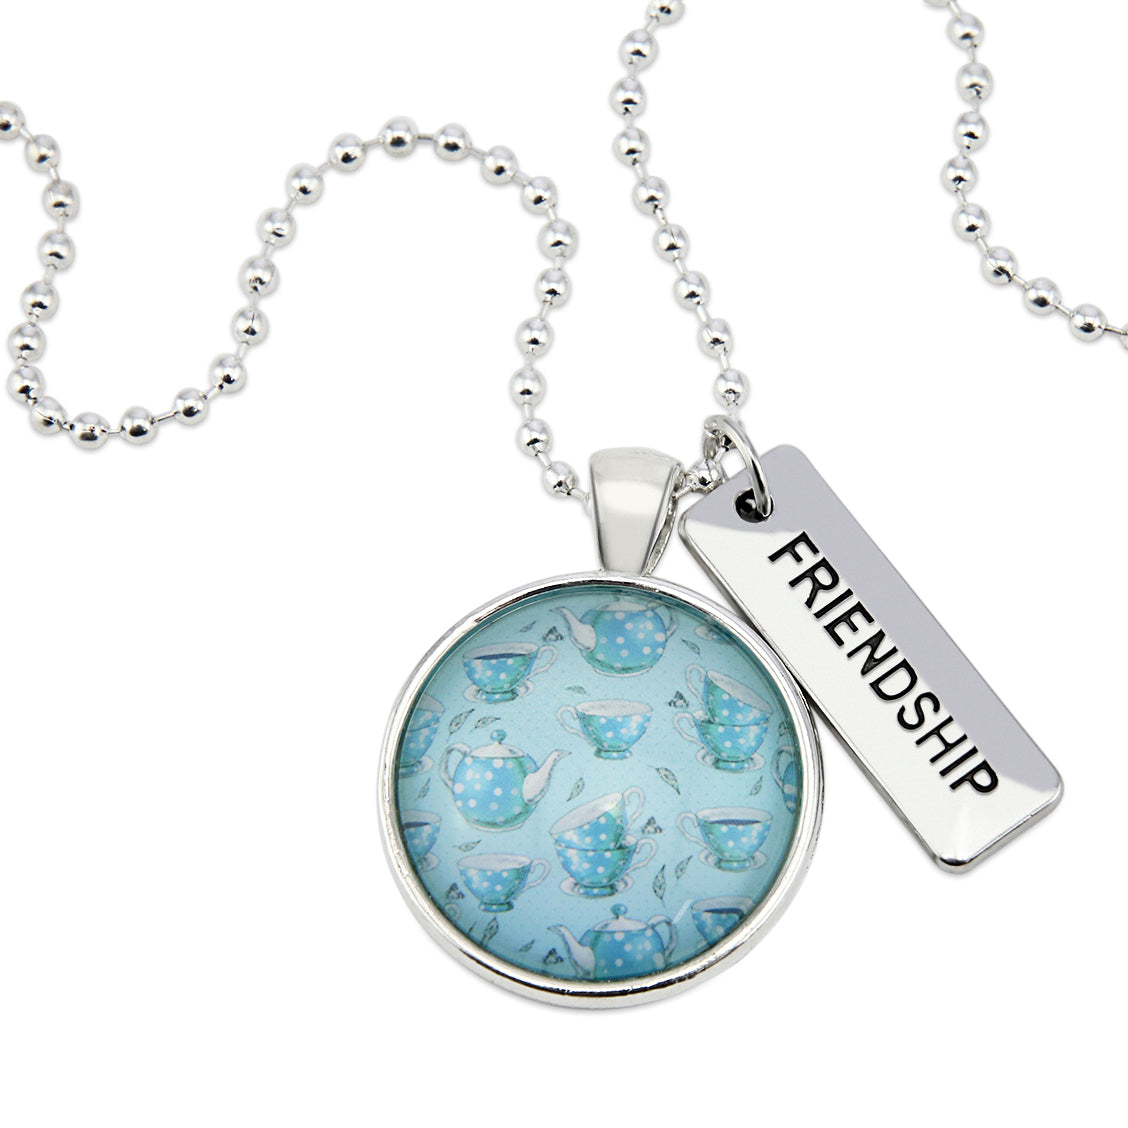 TEAL COLLECTION - Bright Silver 'Friendship' Necklace - Tea Time (1286